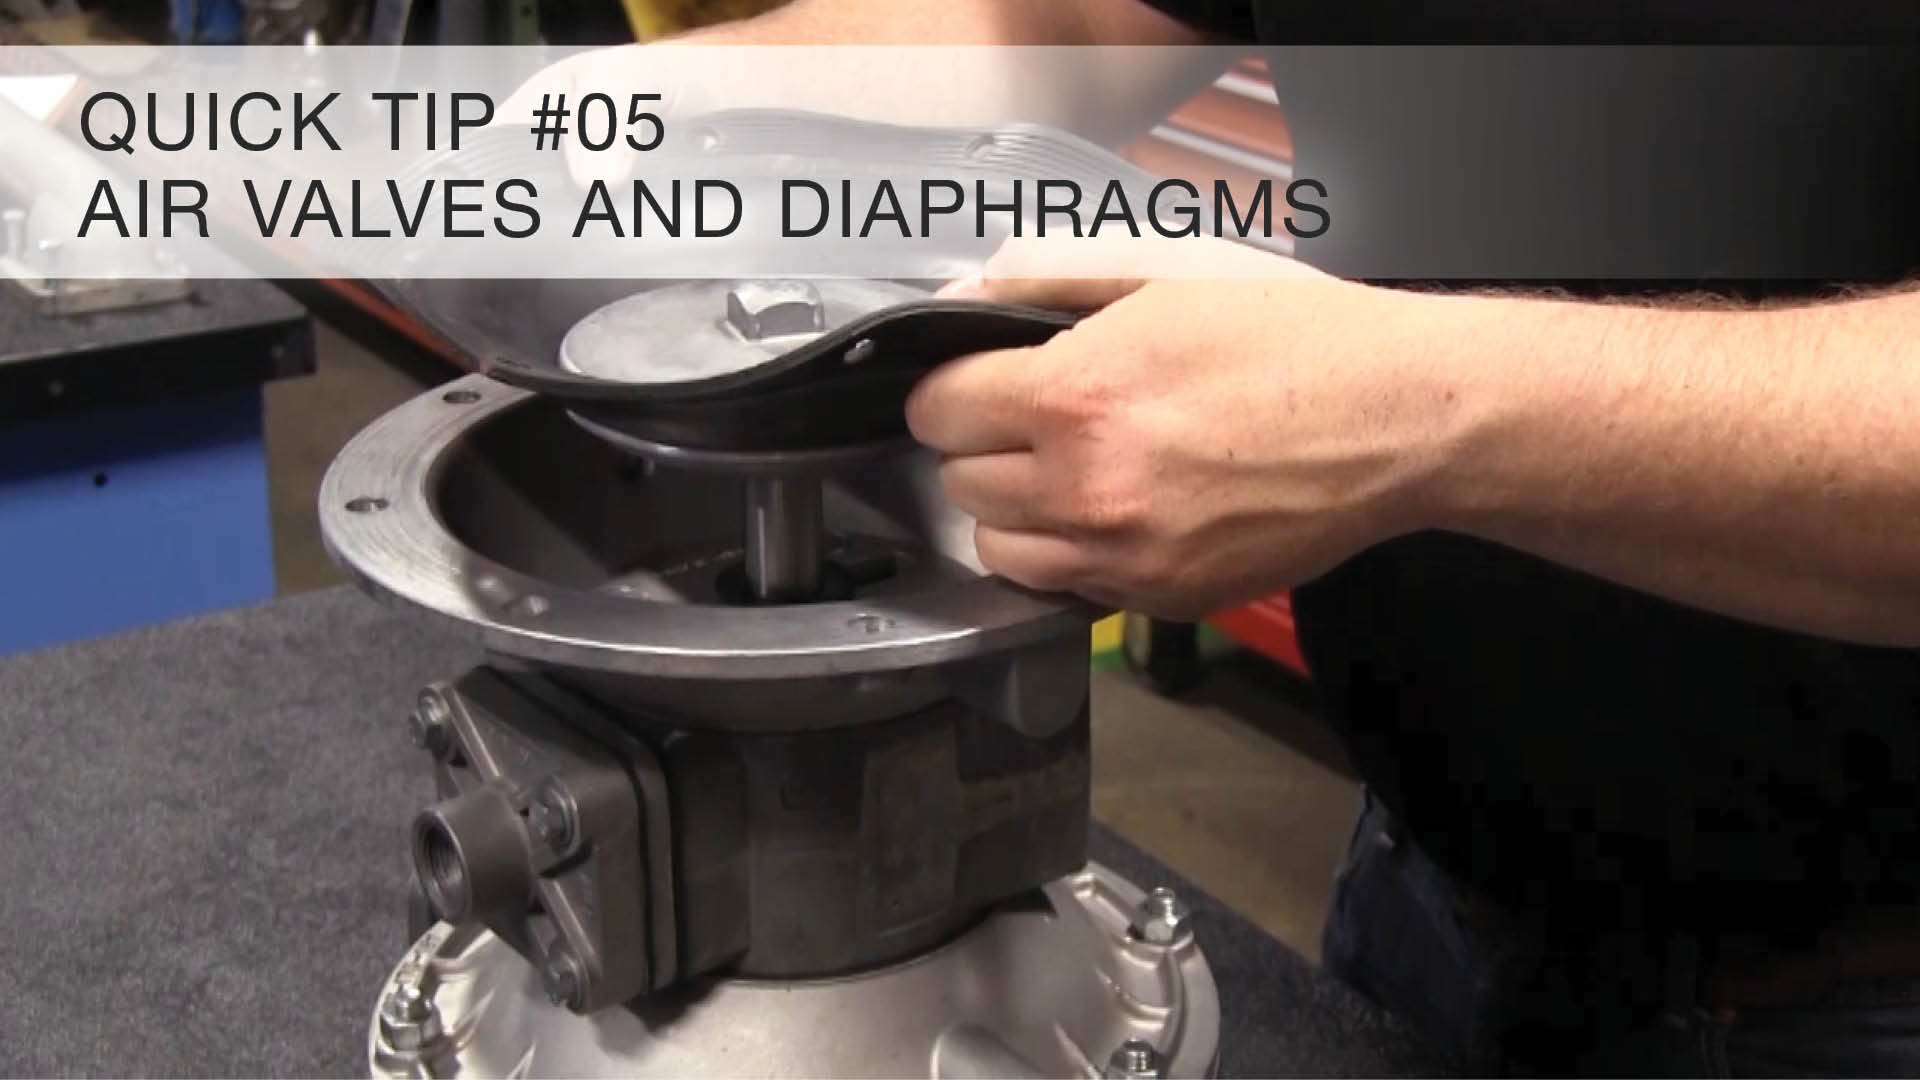 Quick Tip #05 - Air Valves and Diaphragms